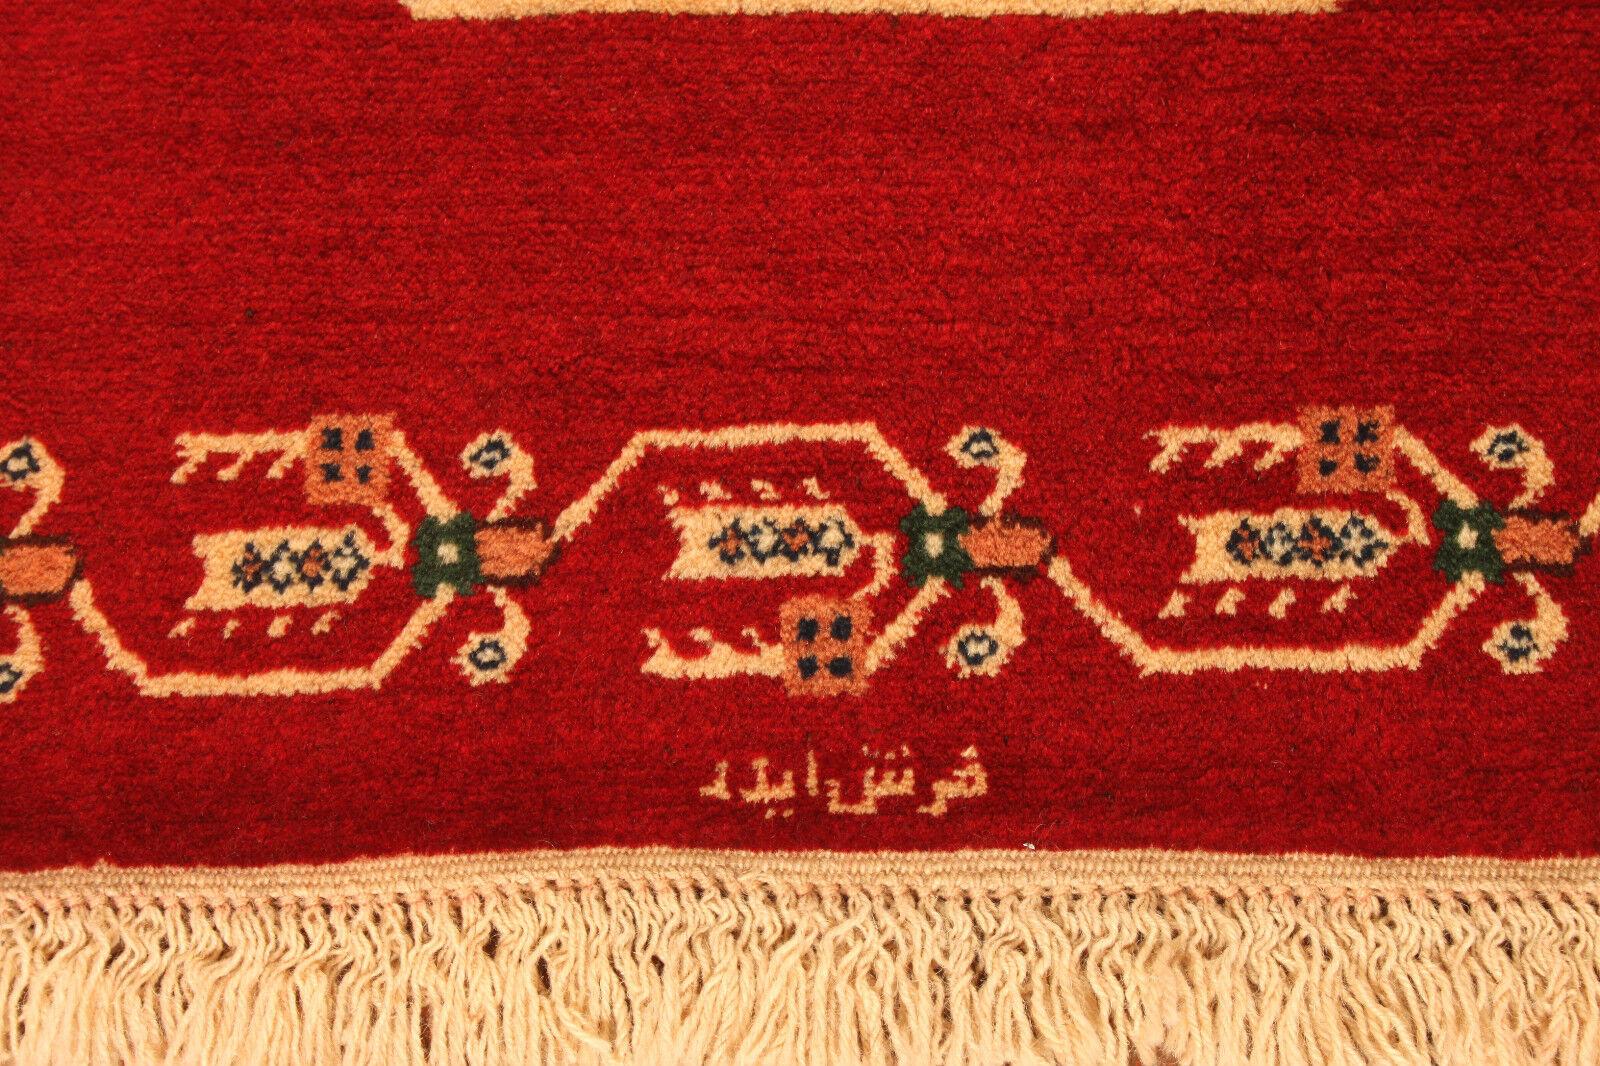 Late 20th Century Handmade Vintage Persian Yalameh Rug 3.3' x 5.1', 1970s - 1T31 For Sale